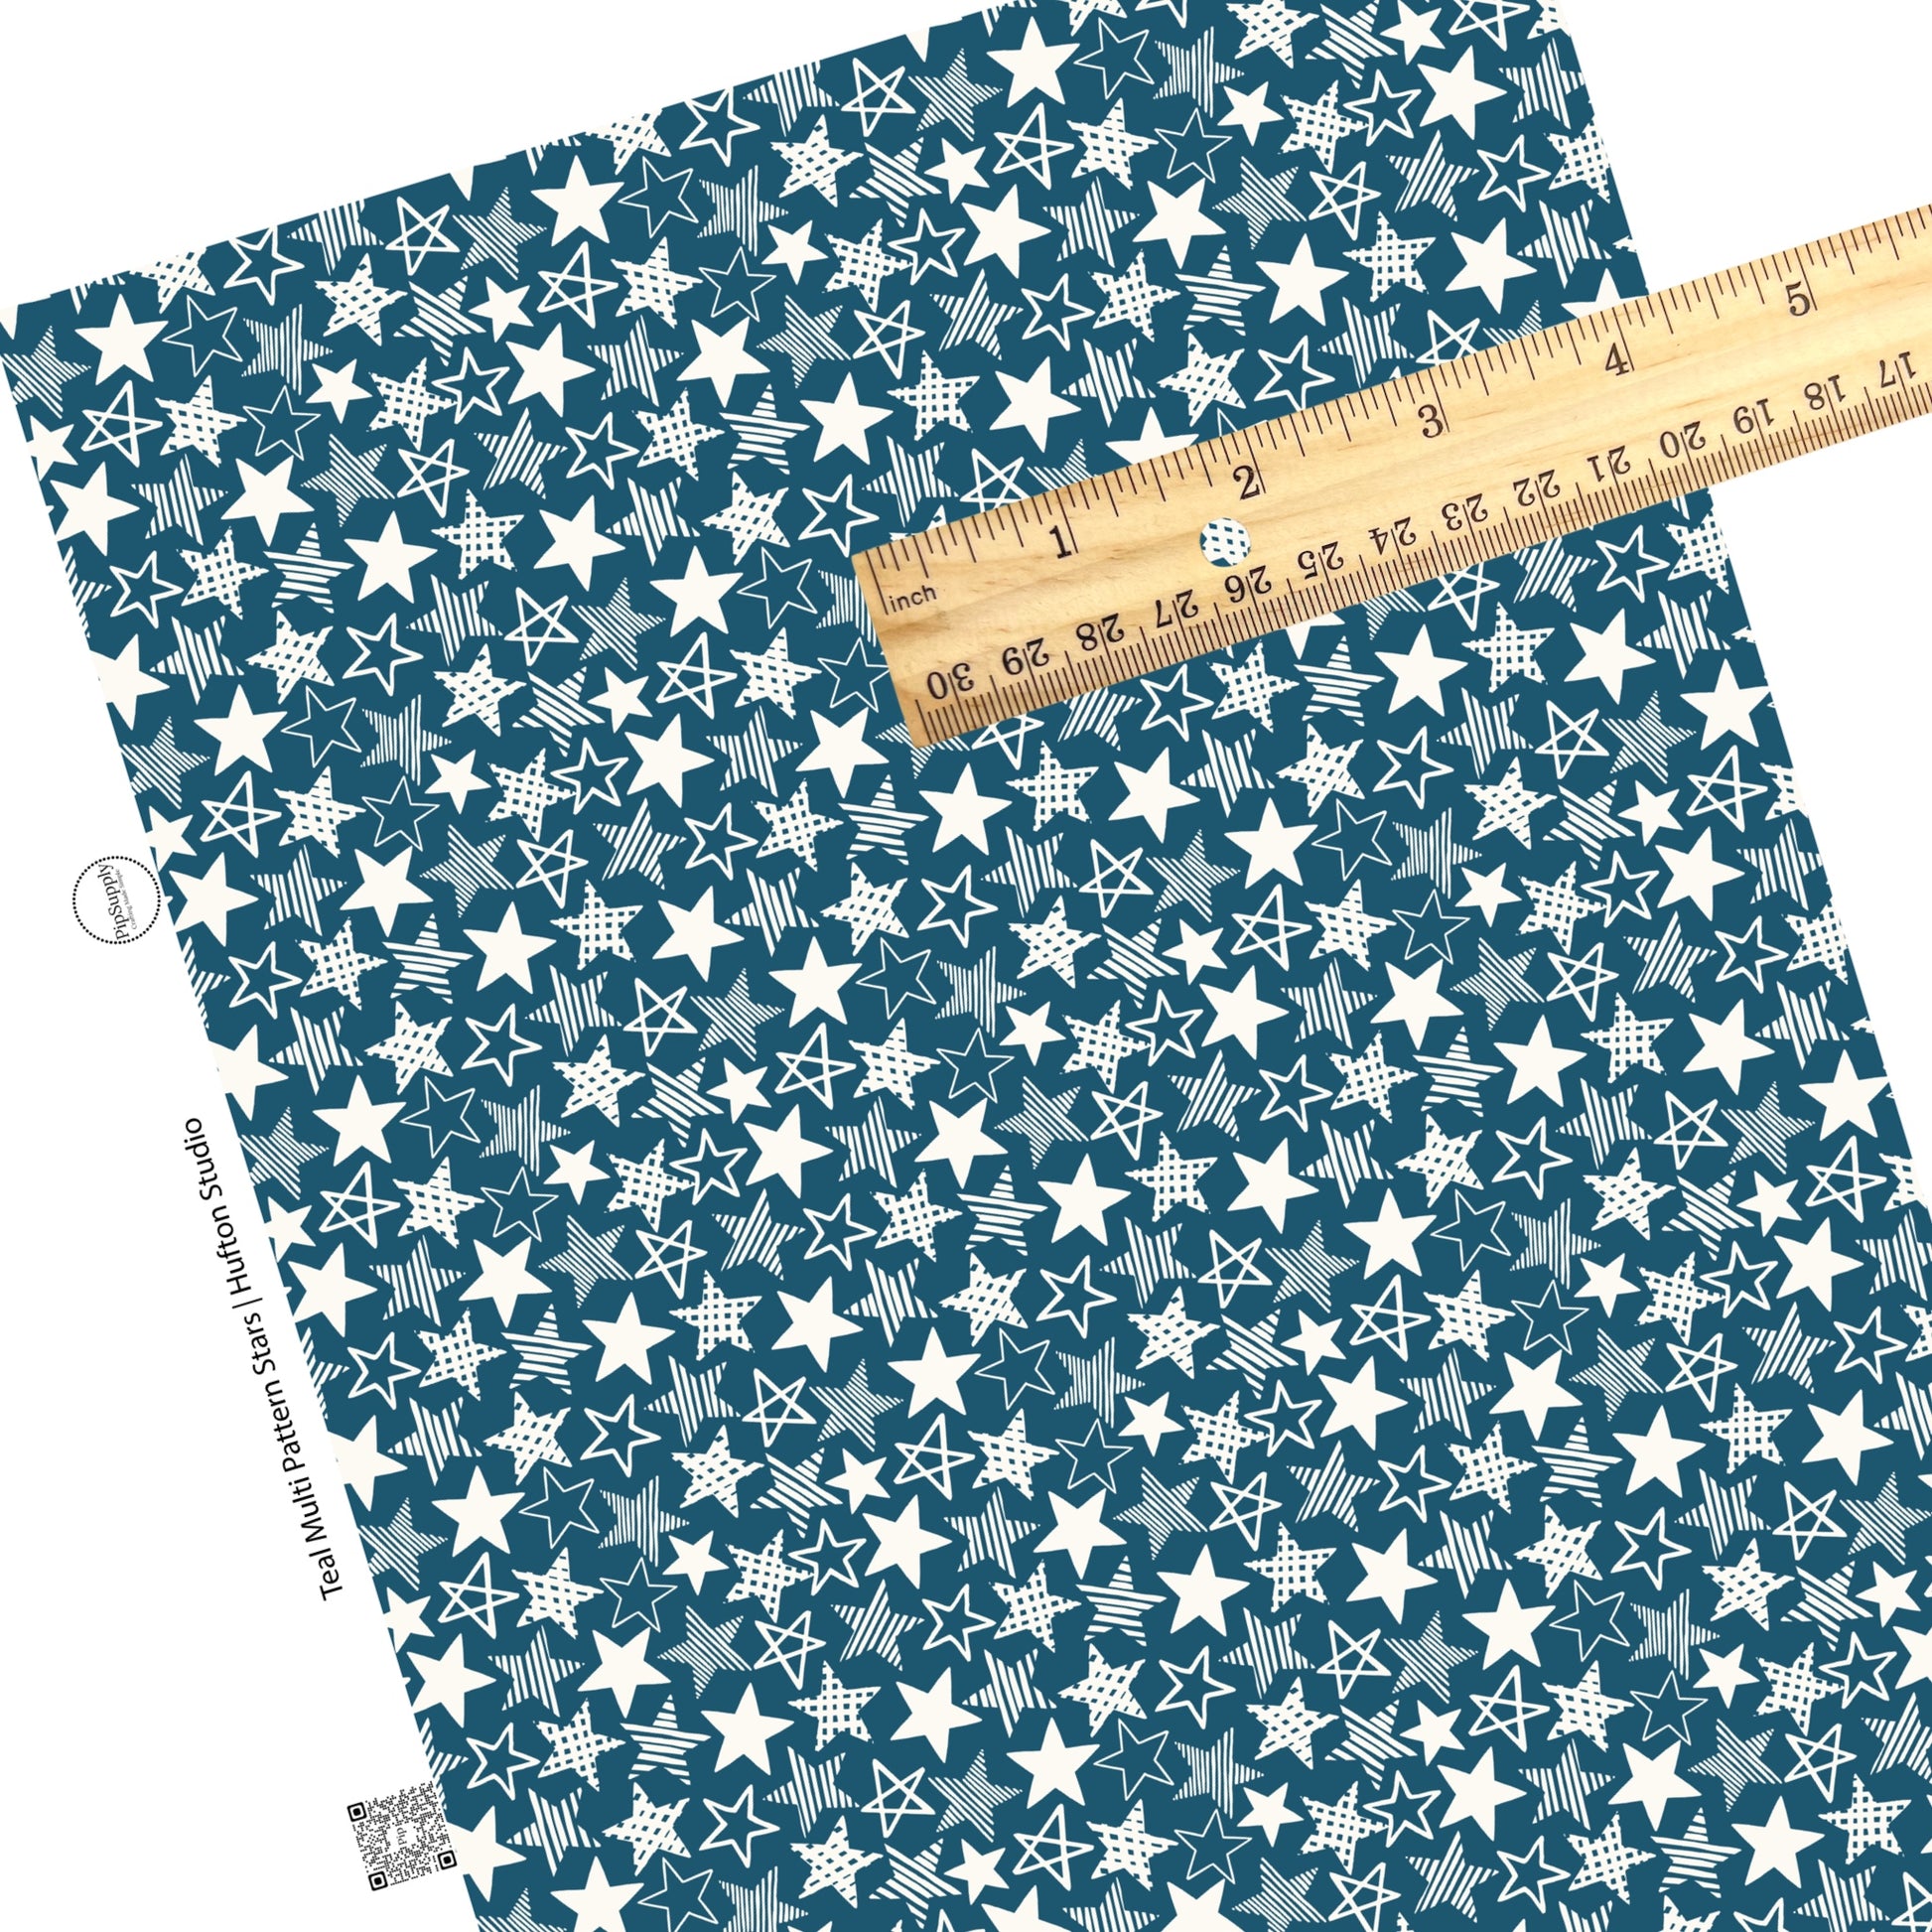 These 4th of July faux leather sheets contain the following design elements: patriotic white patterned stars on blue. Our CPSIA compliant faux leather sheets or rolls can be used for all types of crafting projects.